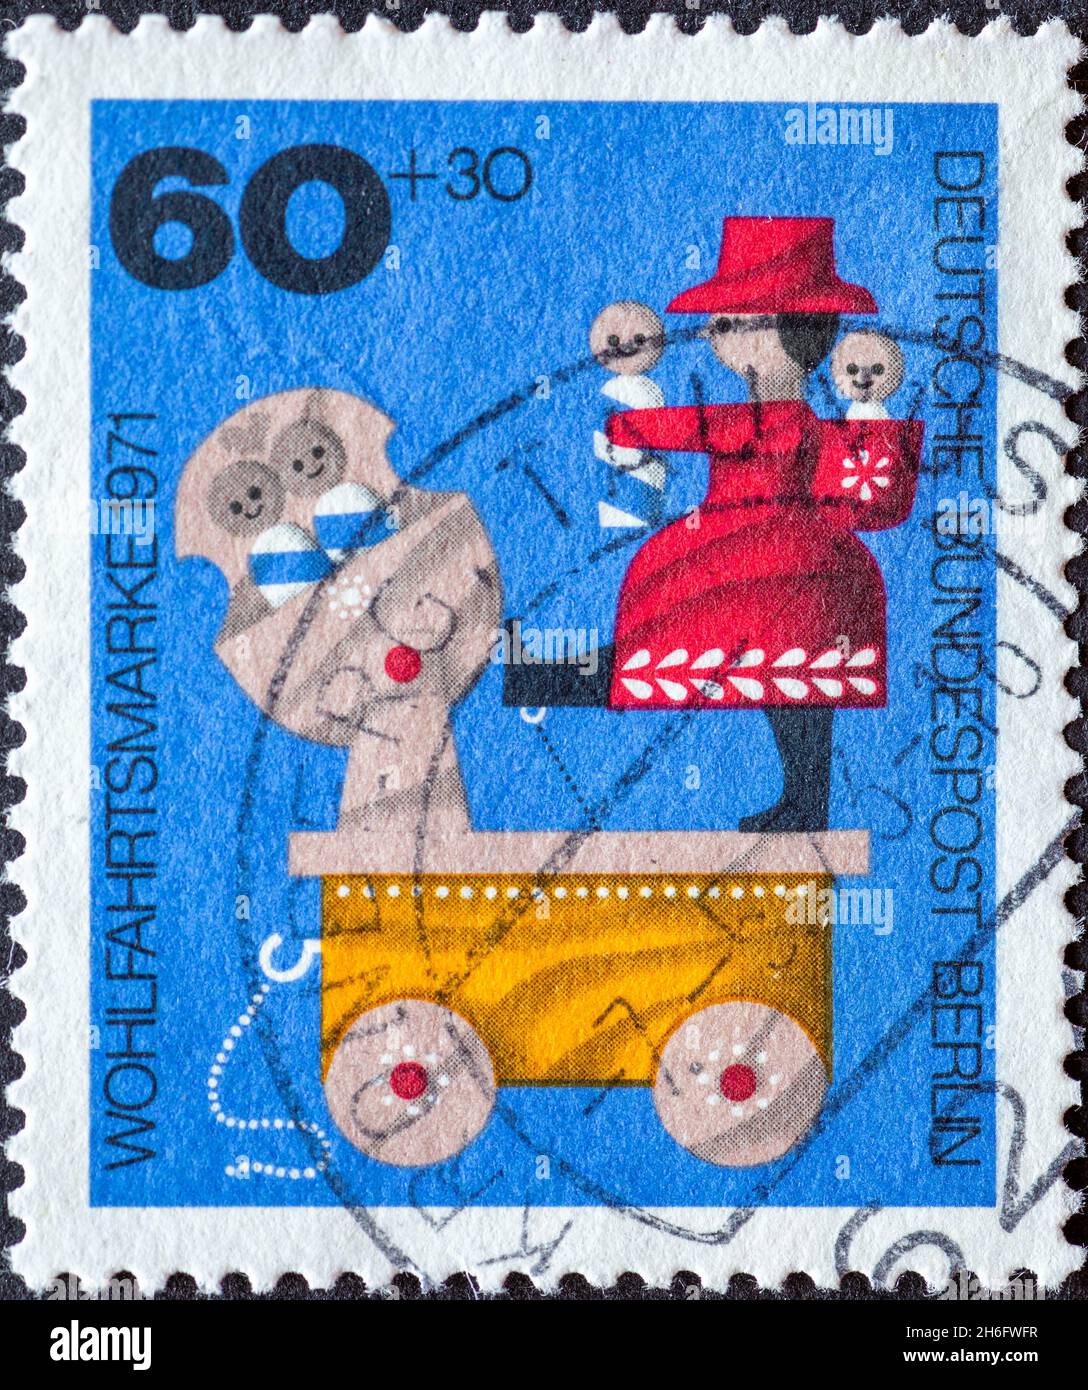 GERMANY, Berlin - CIRCA 1971: a postage stamp from Germany, Berlin showing a 1971 charity postal stamp with old wooden toys. Here:  Mobile swing swing Stock Photo